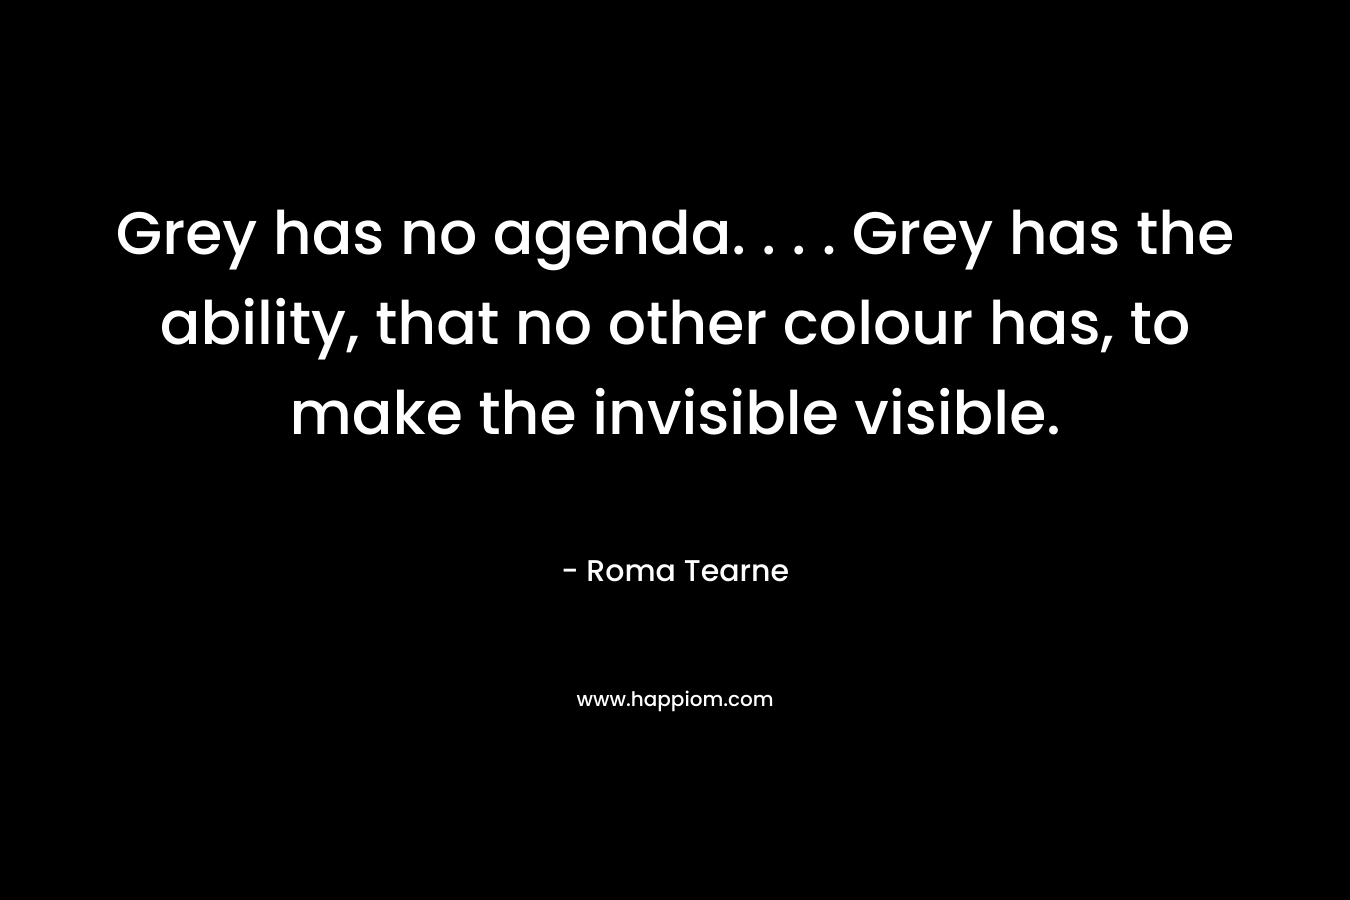 Grey has no agenda. . . . Grey has the ability, that no other colour has, to make the invisible visible.